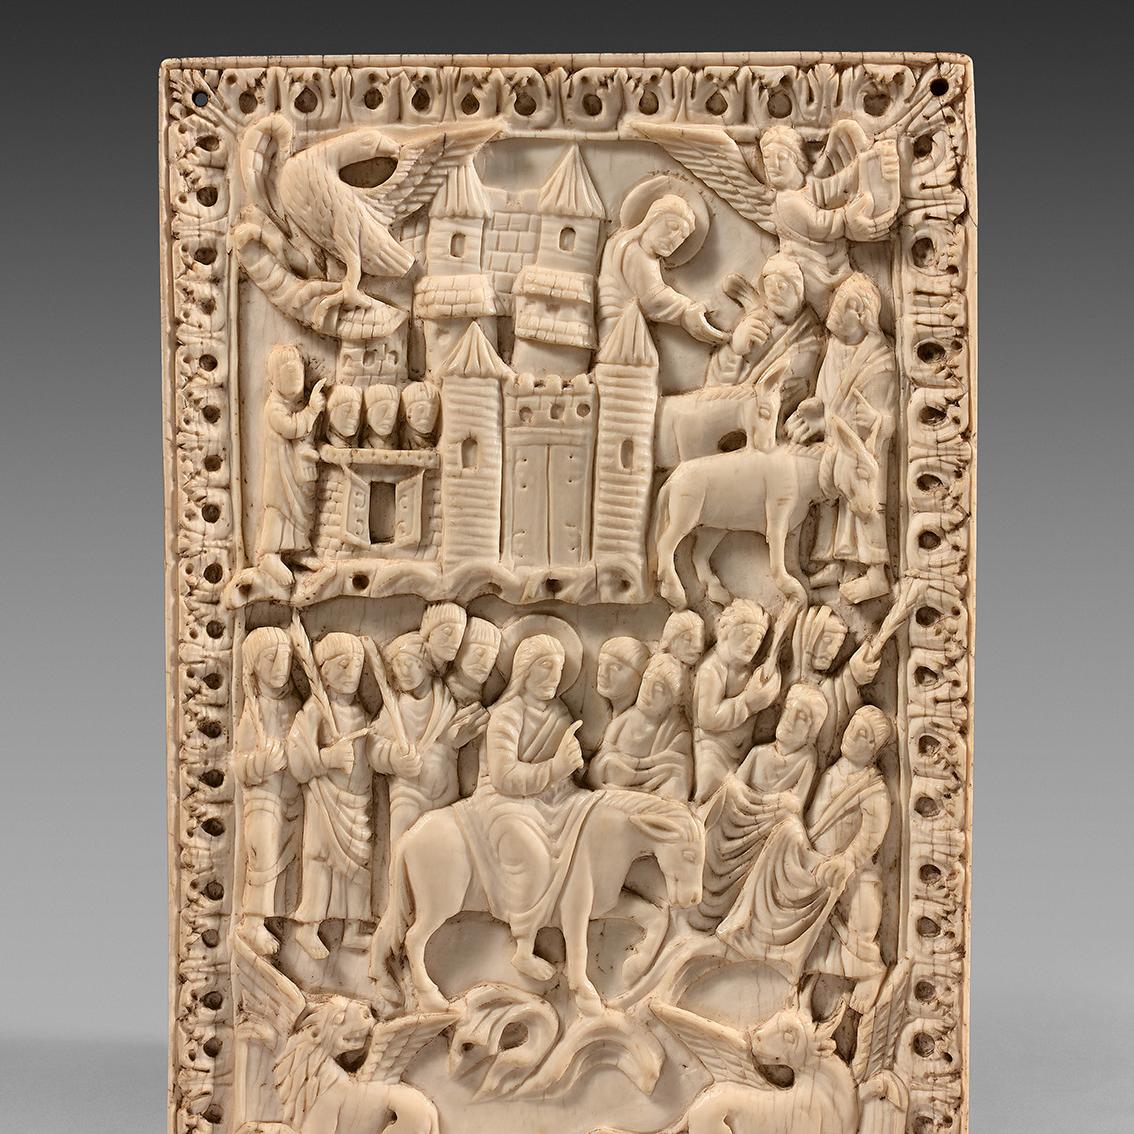 An Ivory from the Carolingian Renaissance - Pre-sale